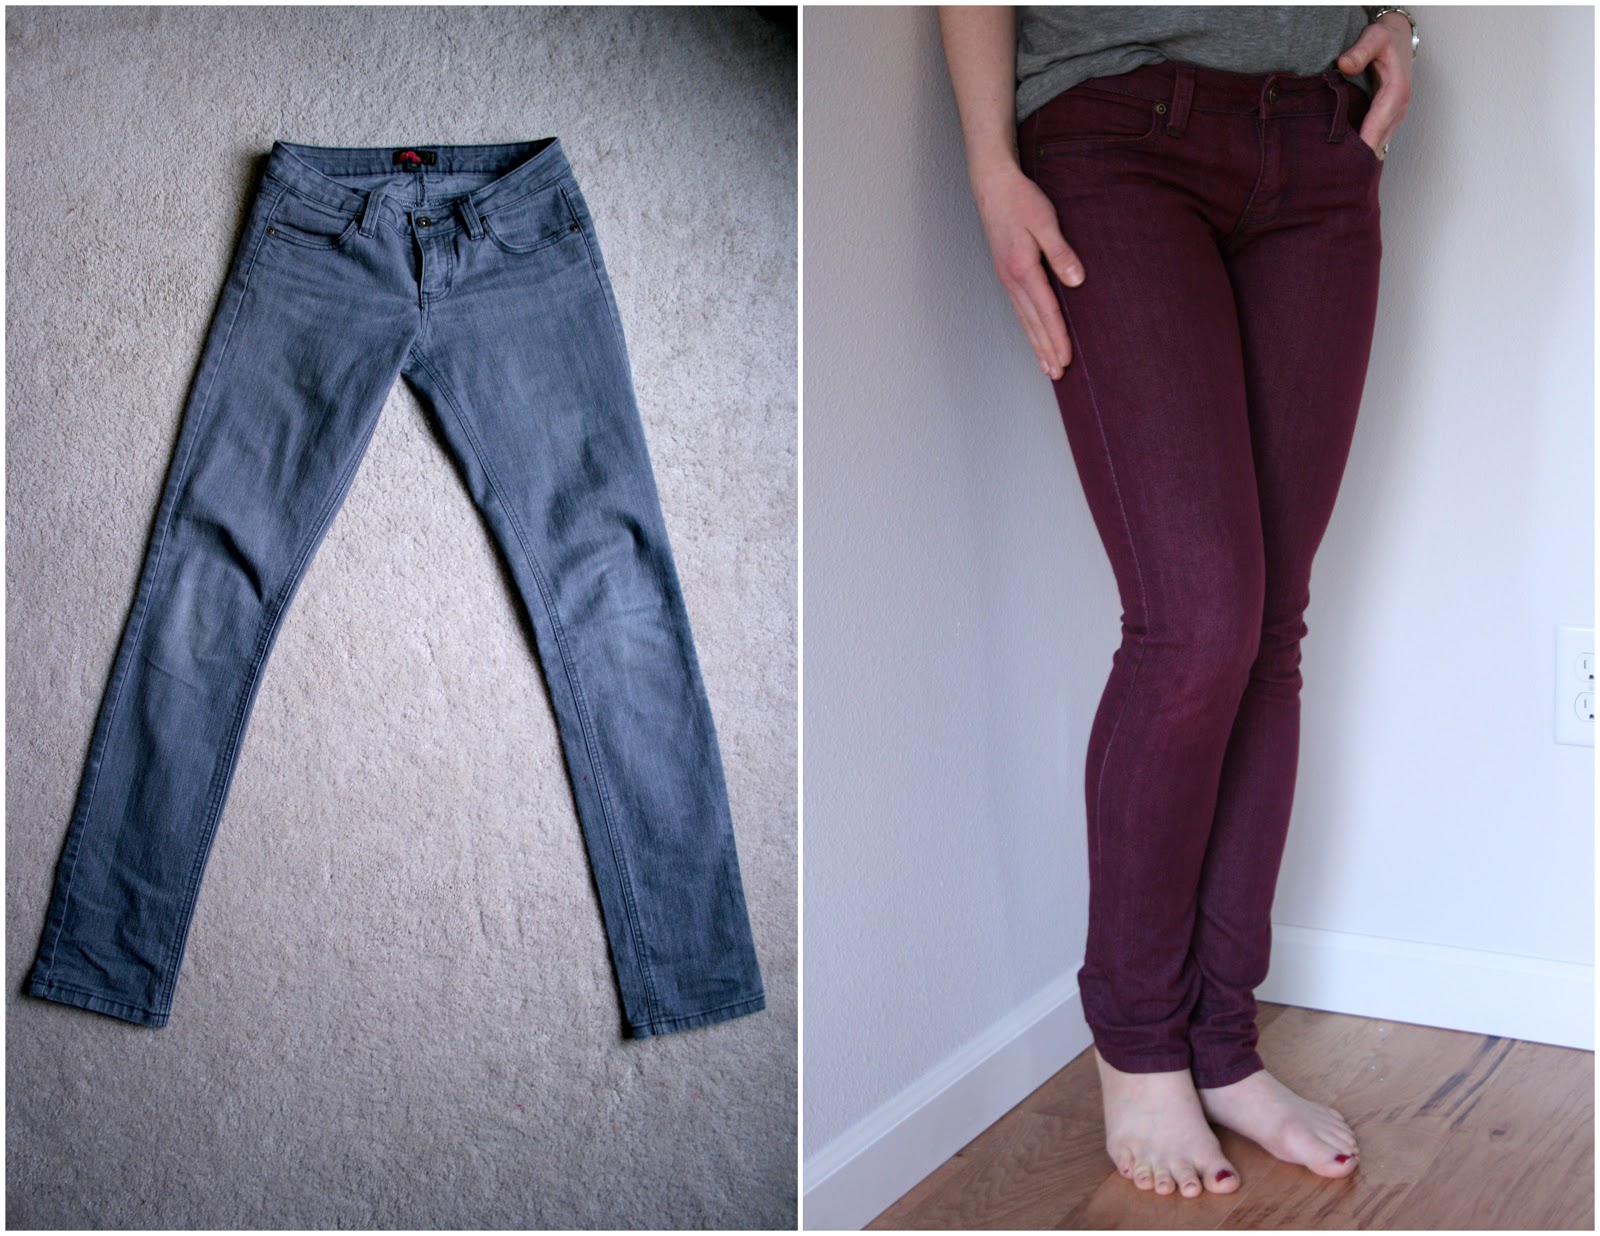 Totally successful: Burgundy dyed jeans project / Create / Enjoy